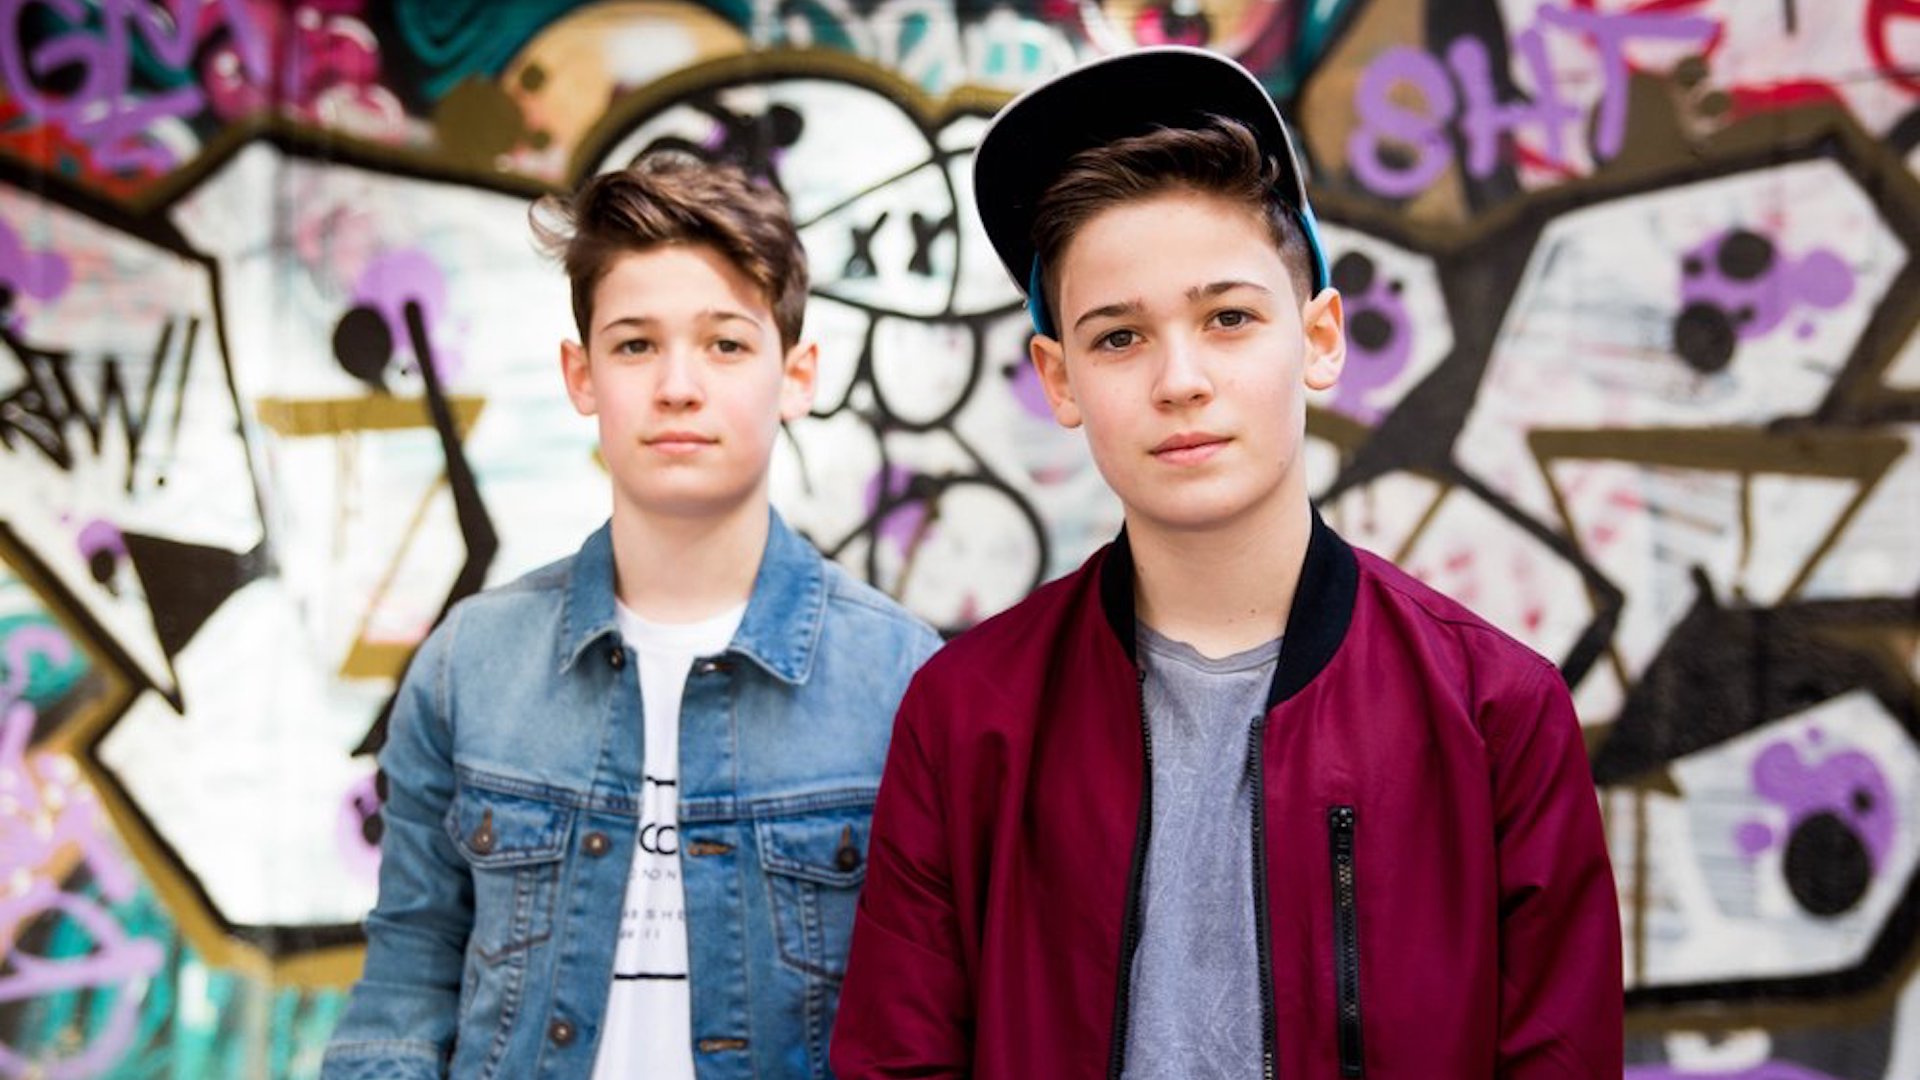 Max and Harvey stand in front of a graffiti wall